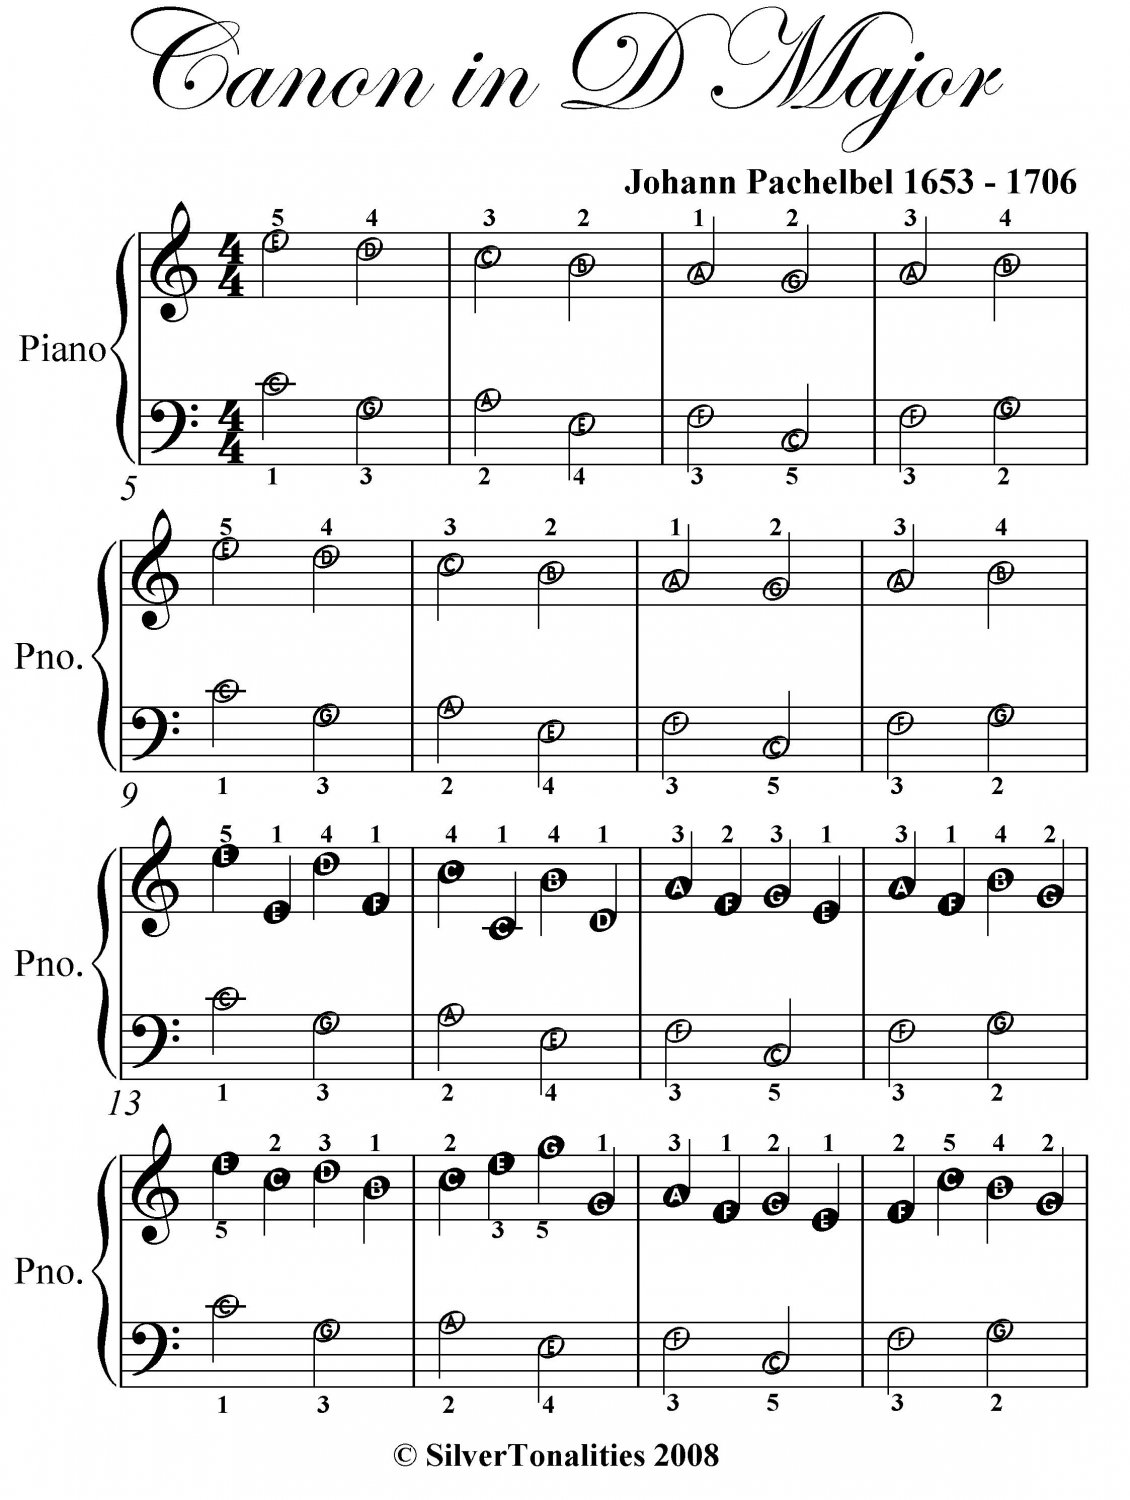 canon-in-d-piano-sheet-music-free-printable-printable-word-searches